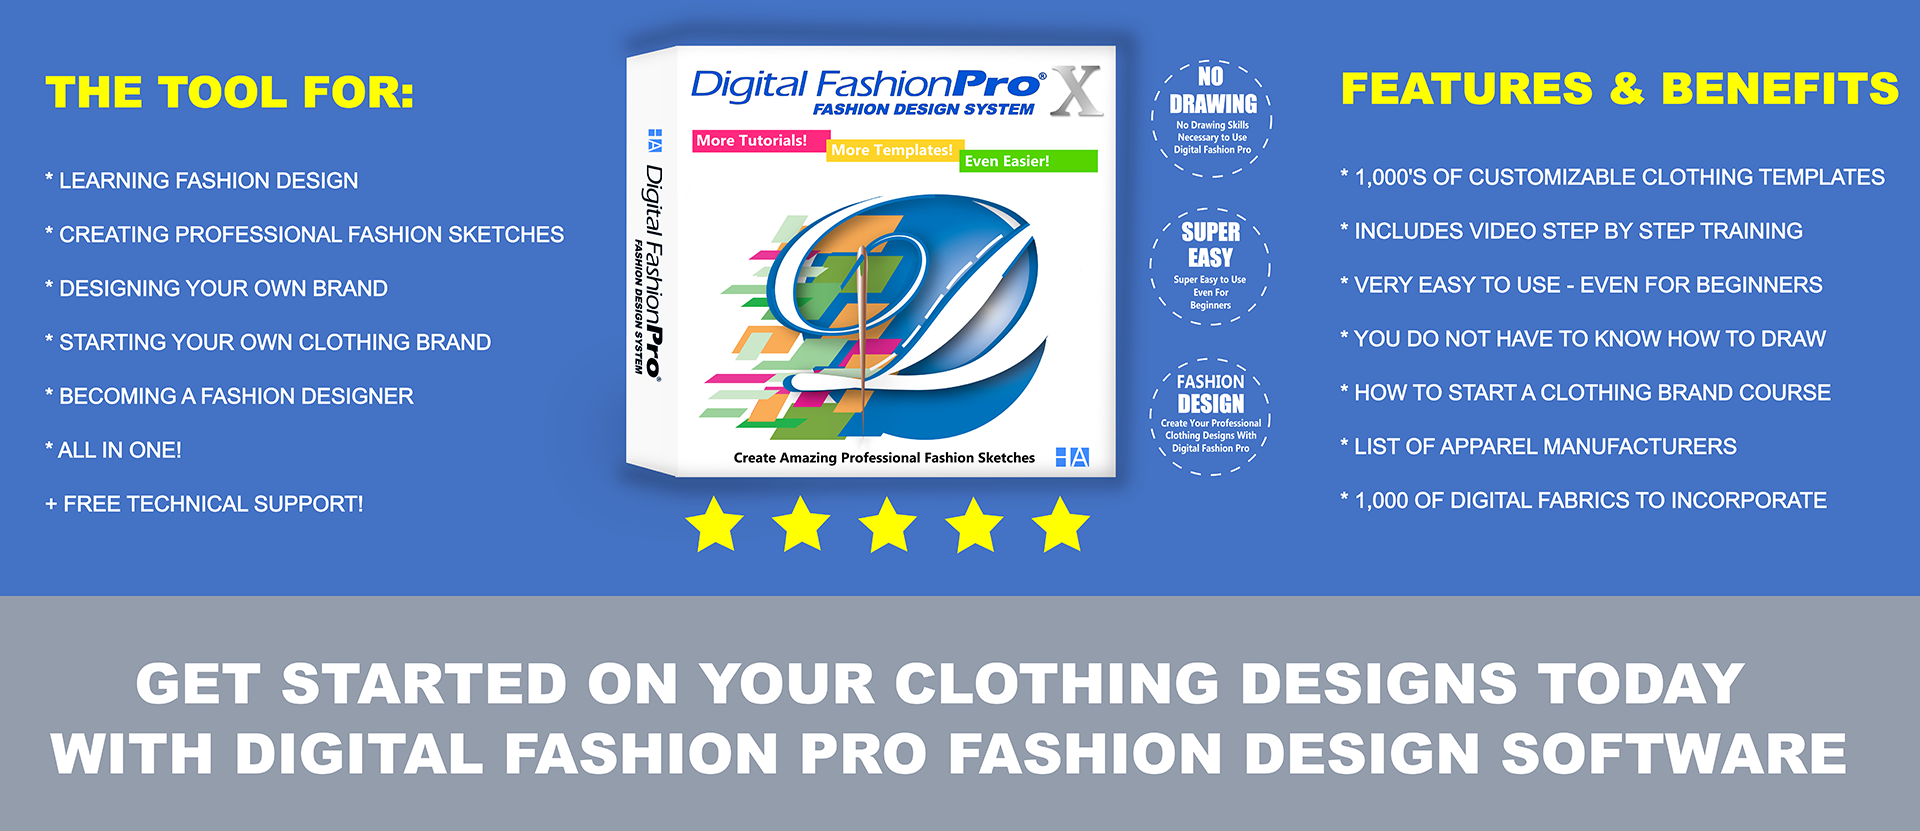 Digital Fashion Pro is the tool for clothing design and here are the benefits